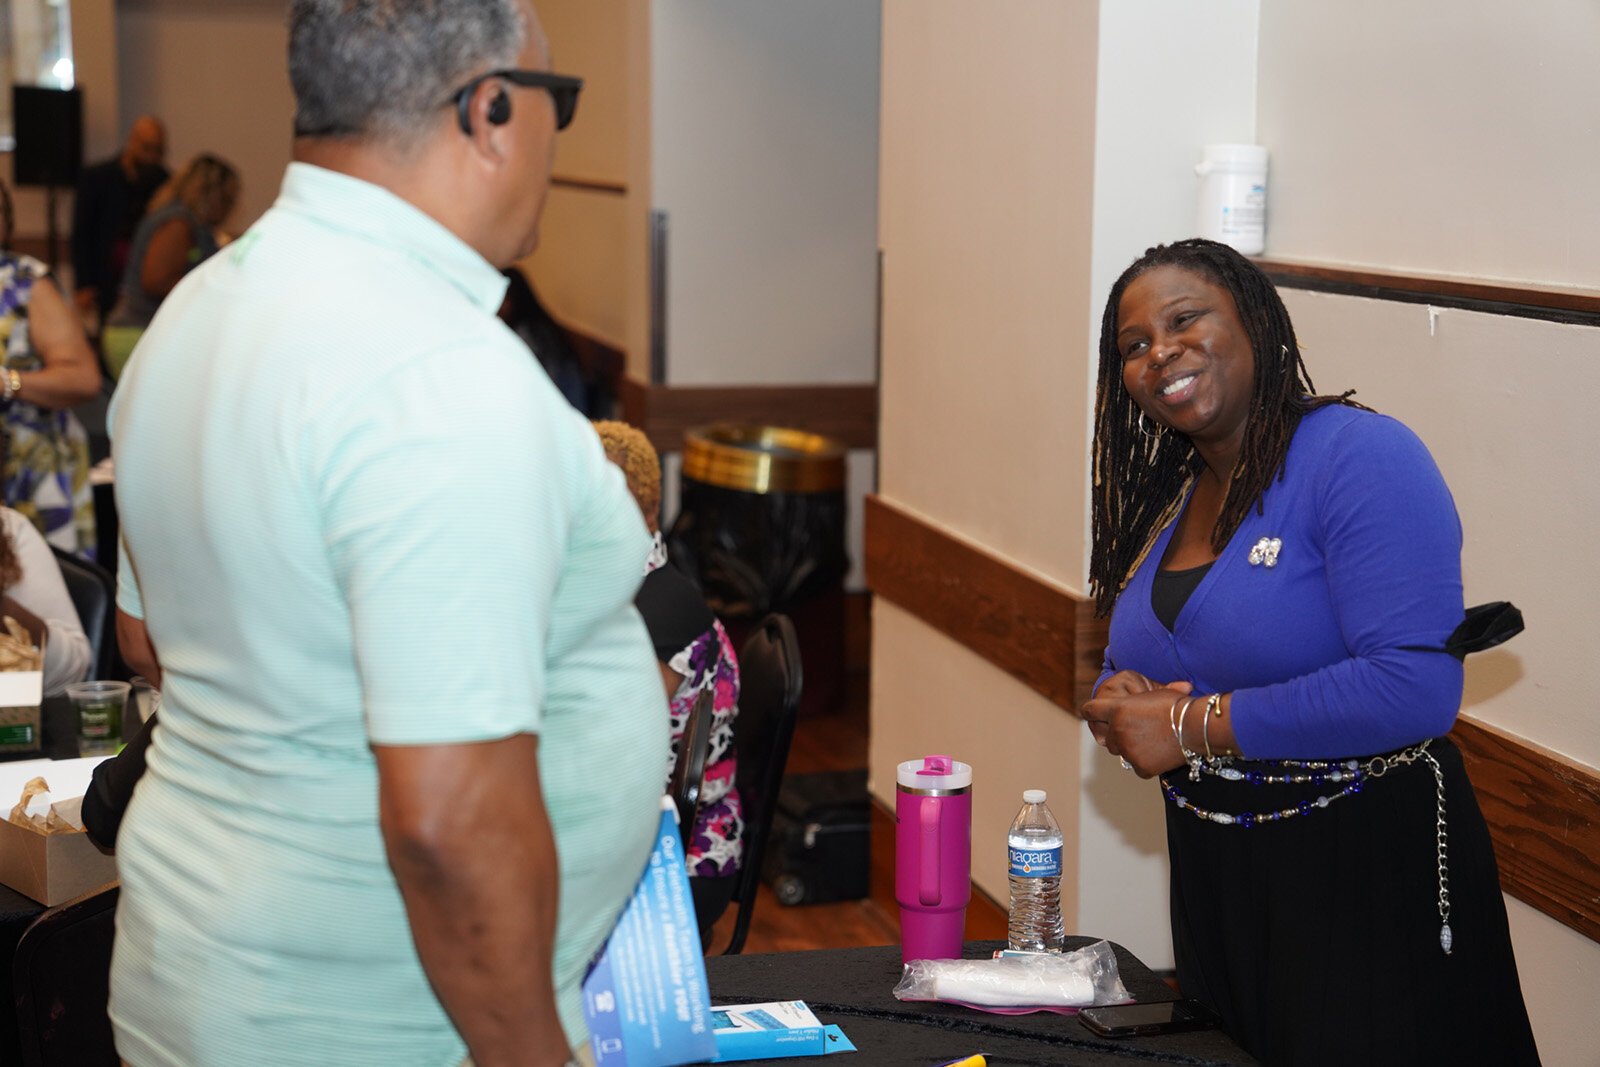 The Inclusive Health Care Taskforce hosted an information and resource fair on June 13.